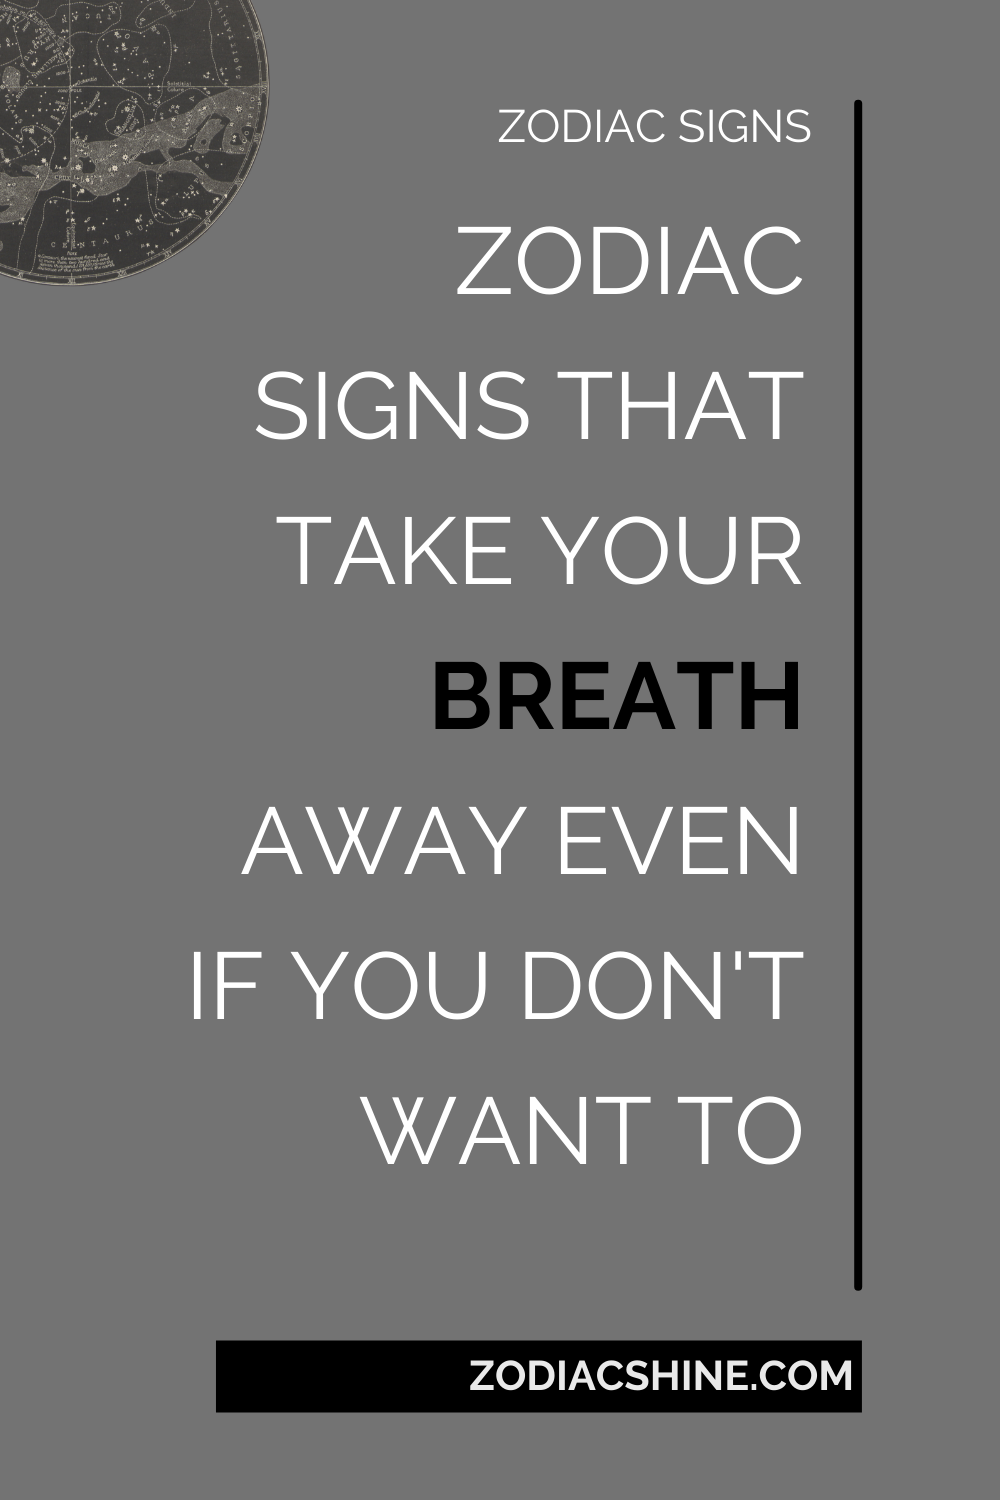 ZODIAC SIGNS THAT TAKE YOUR BREATH AWAY EVEN IF YOU DON'T WANT TO